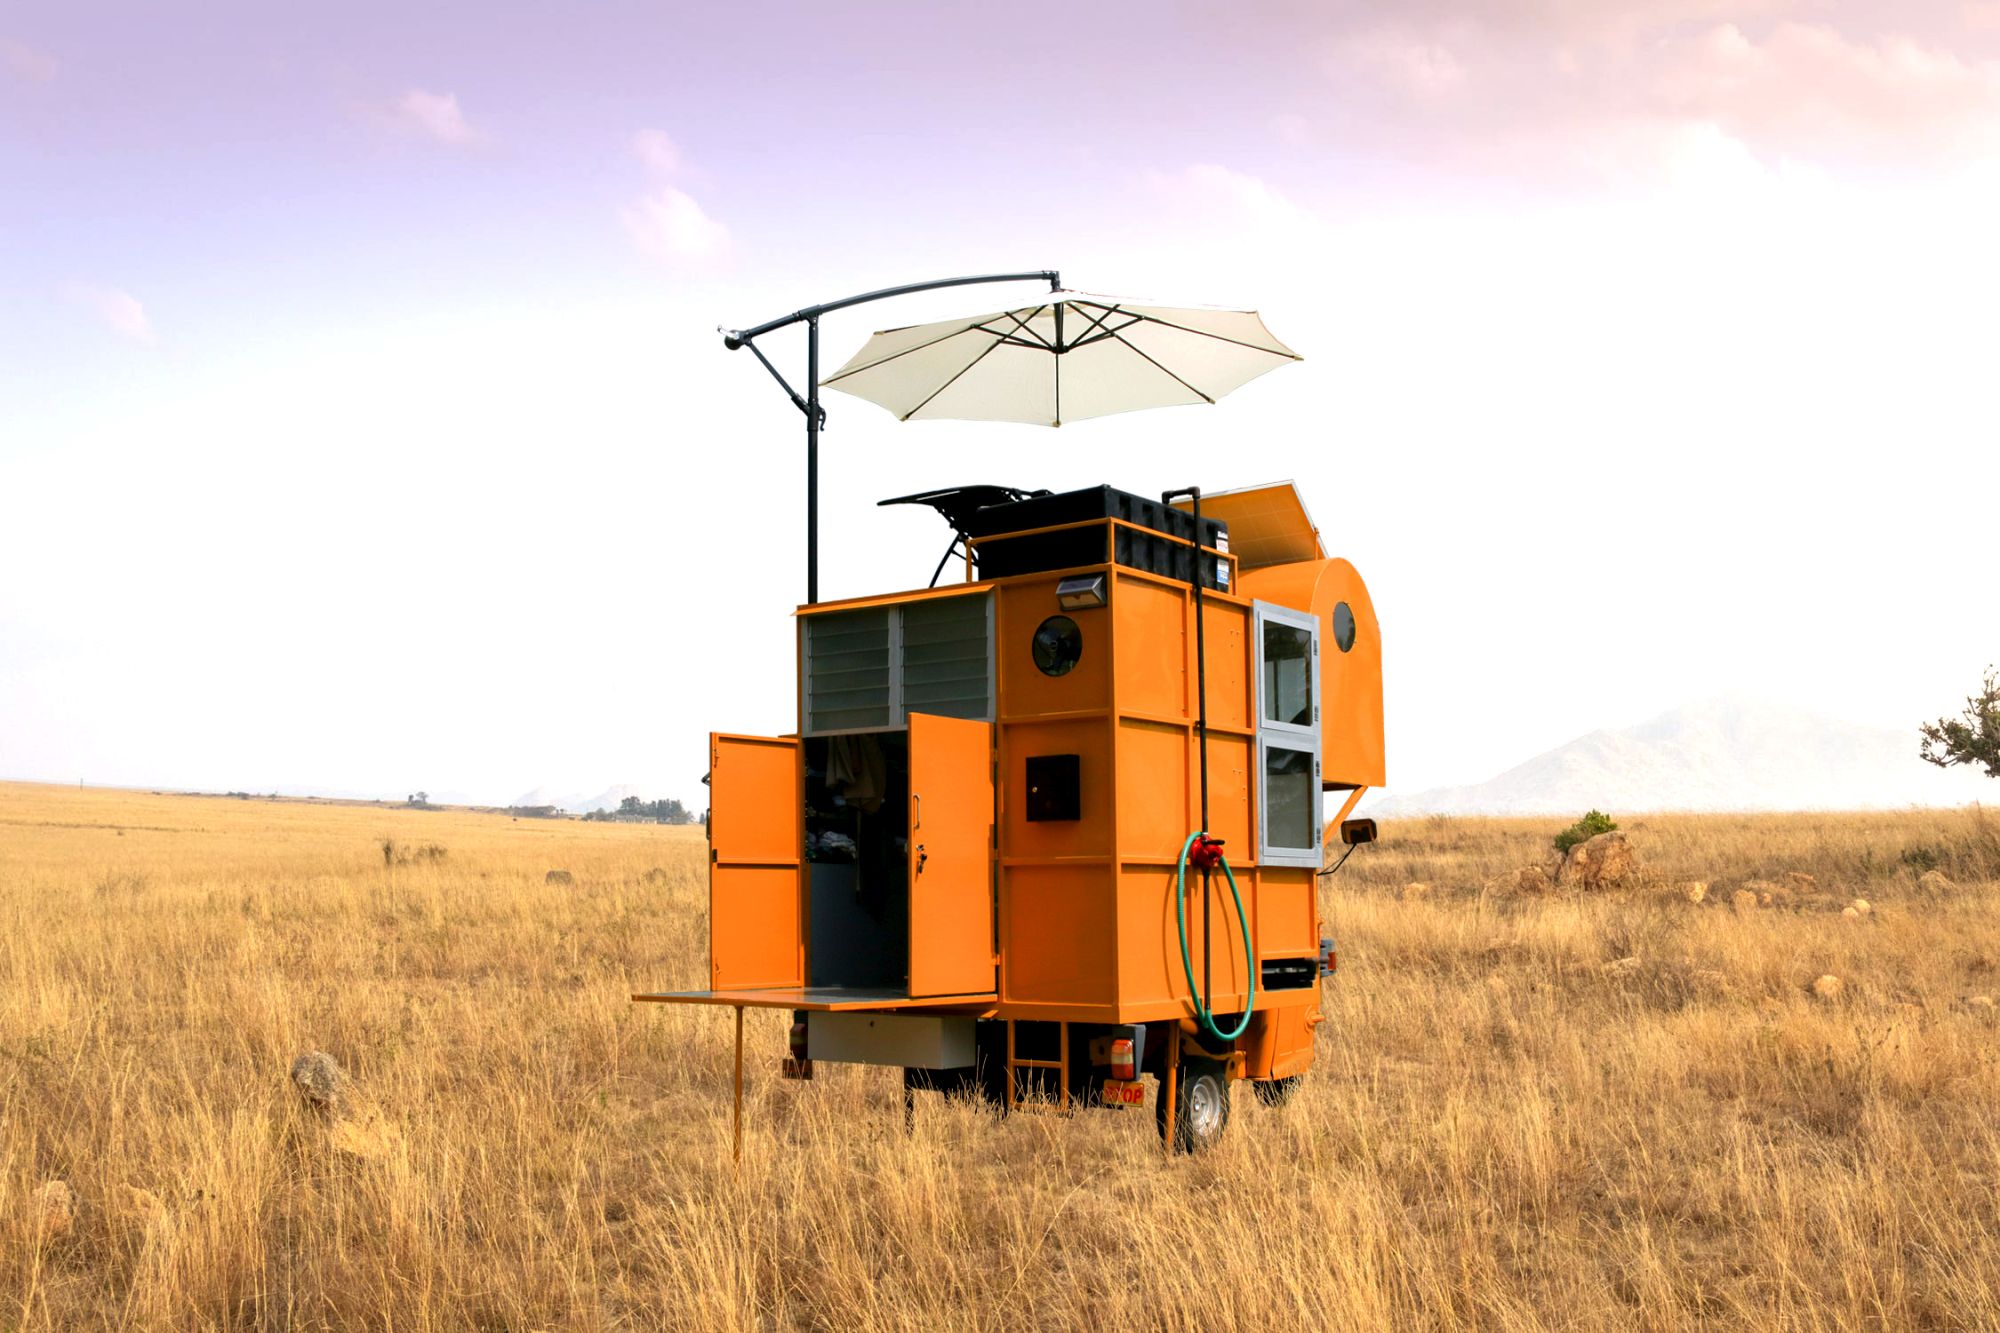 Portable housing concepts in India, by The BILLBOARDS Collective